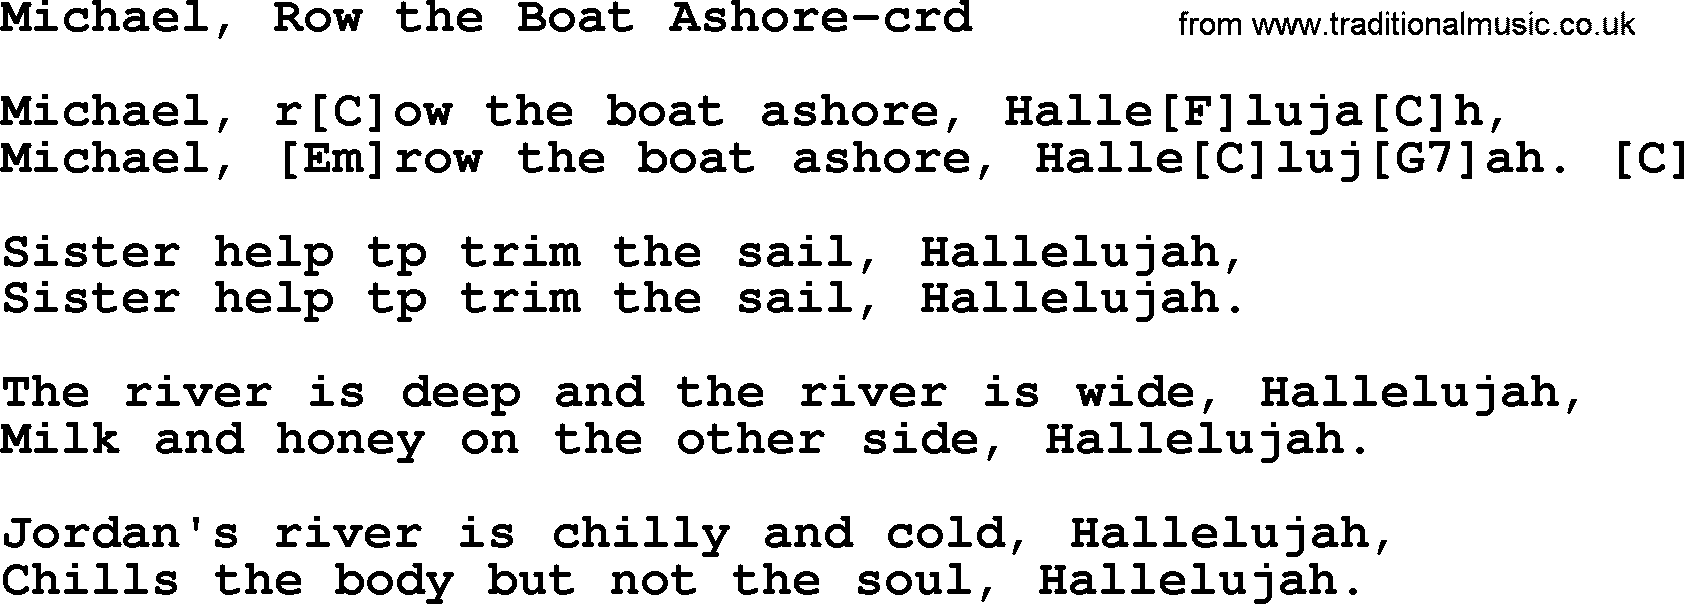 Pete Seeger song Michael, Row the Boat Ashore, lyrics and chords